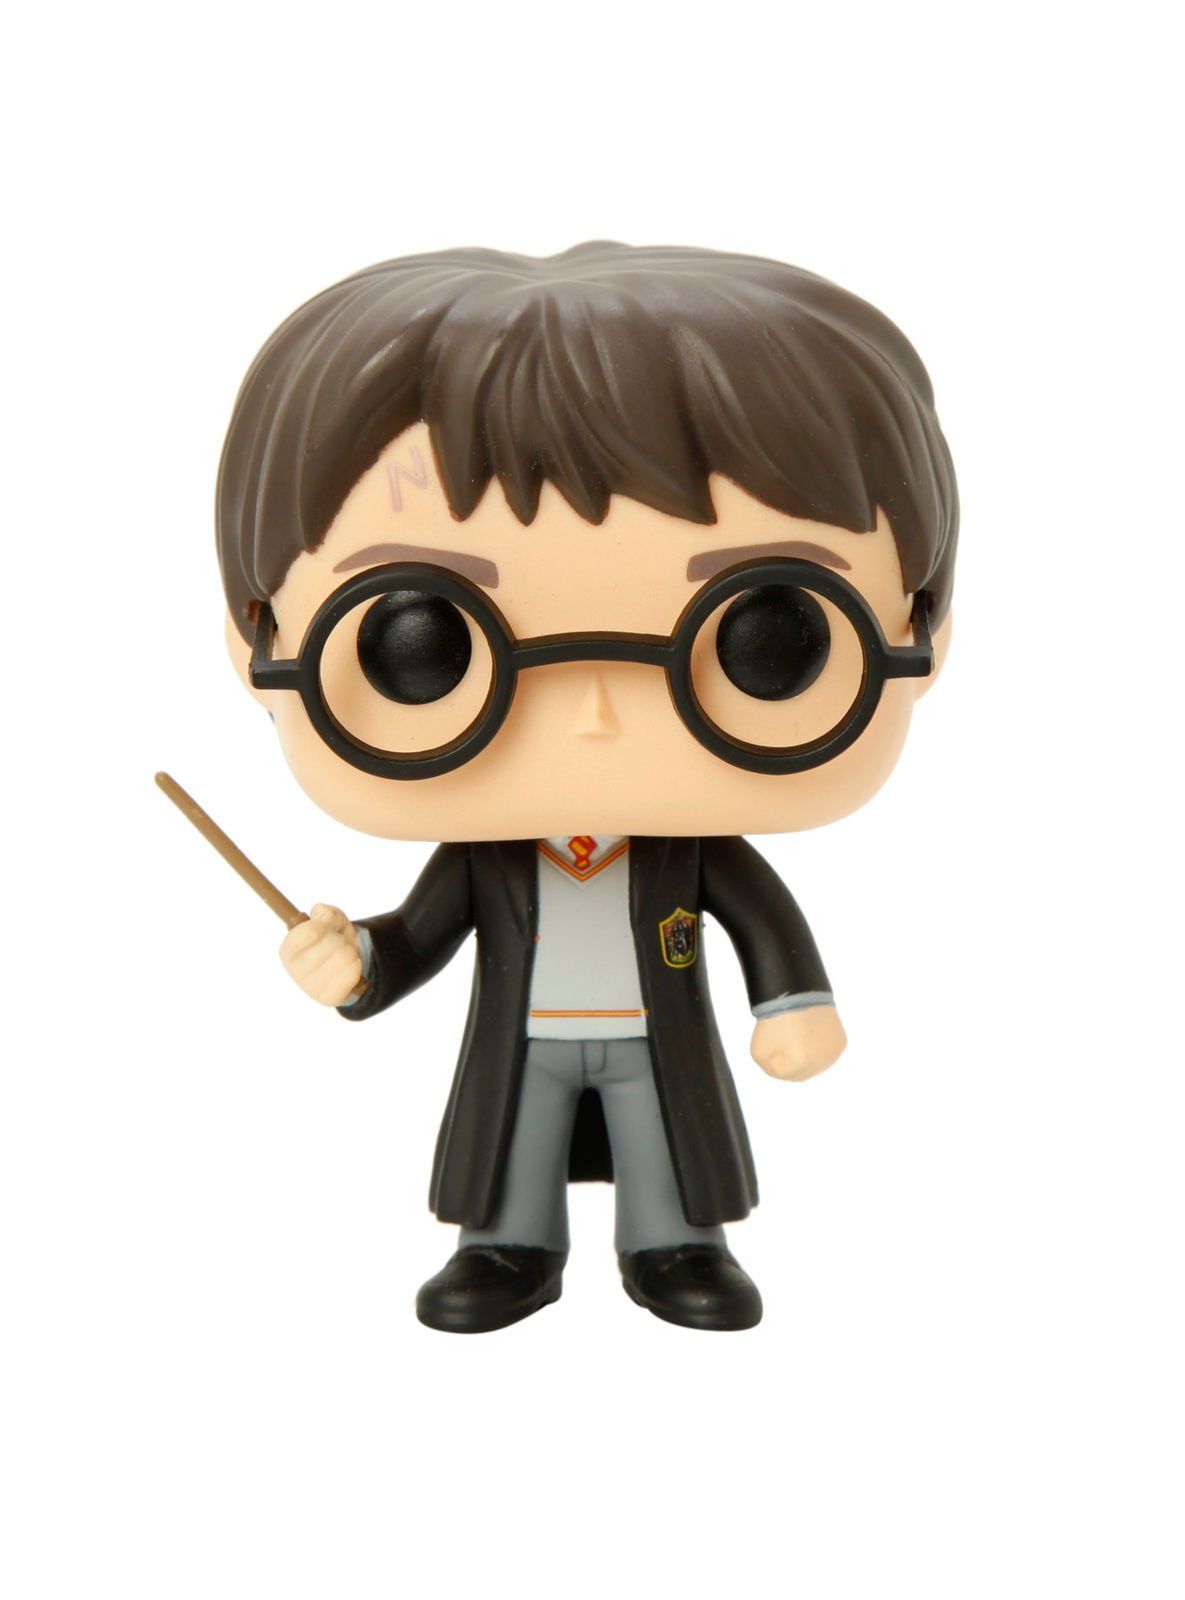 Harry Potter with Wizard Wand Funko Pop Vinyl Figure #01 | Tall Man Toys